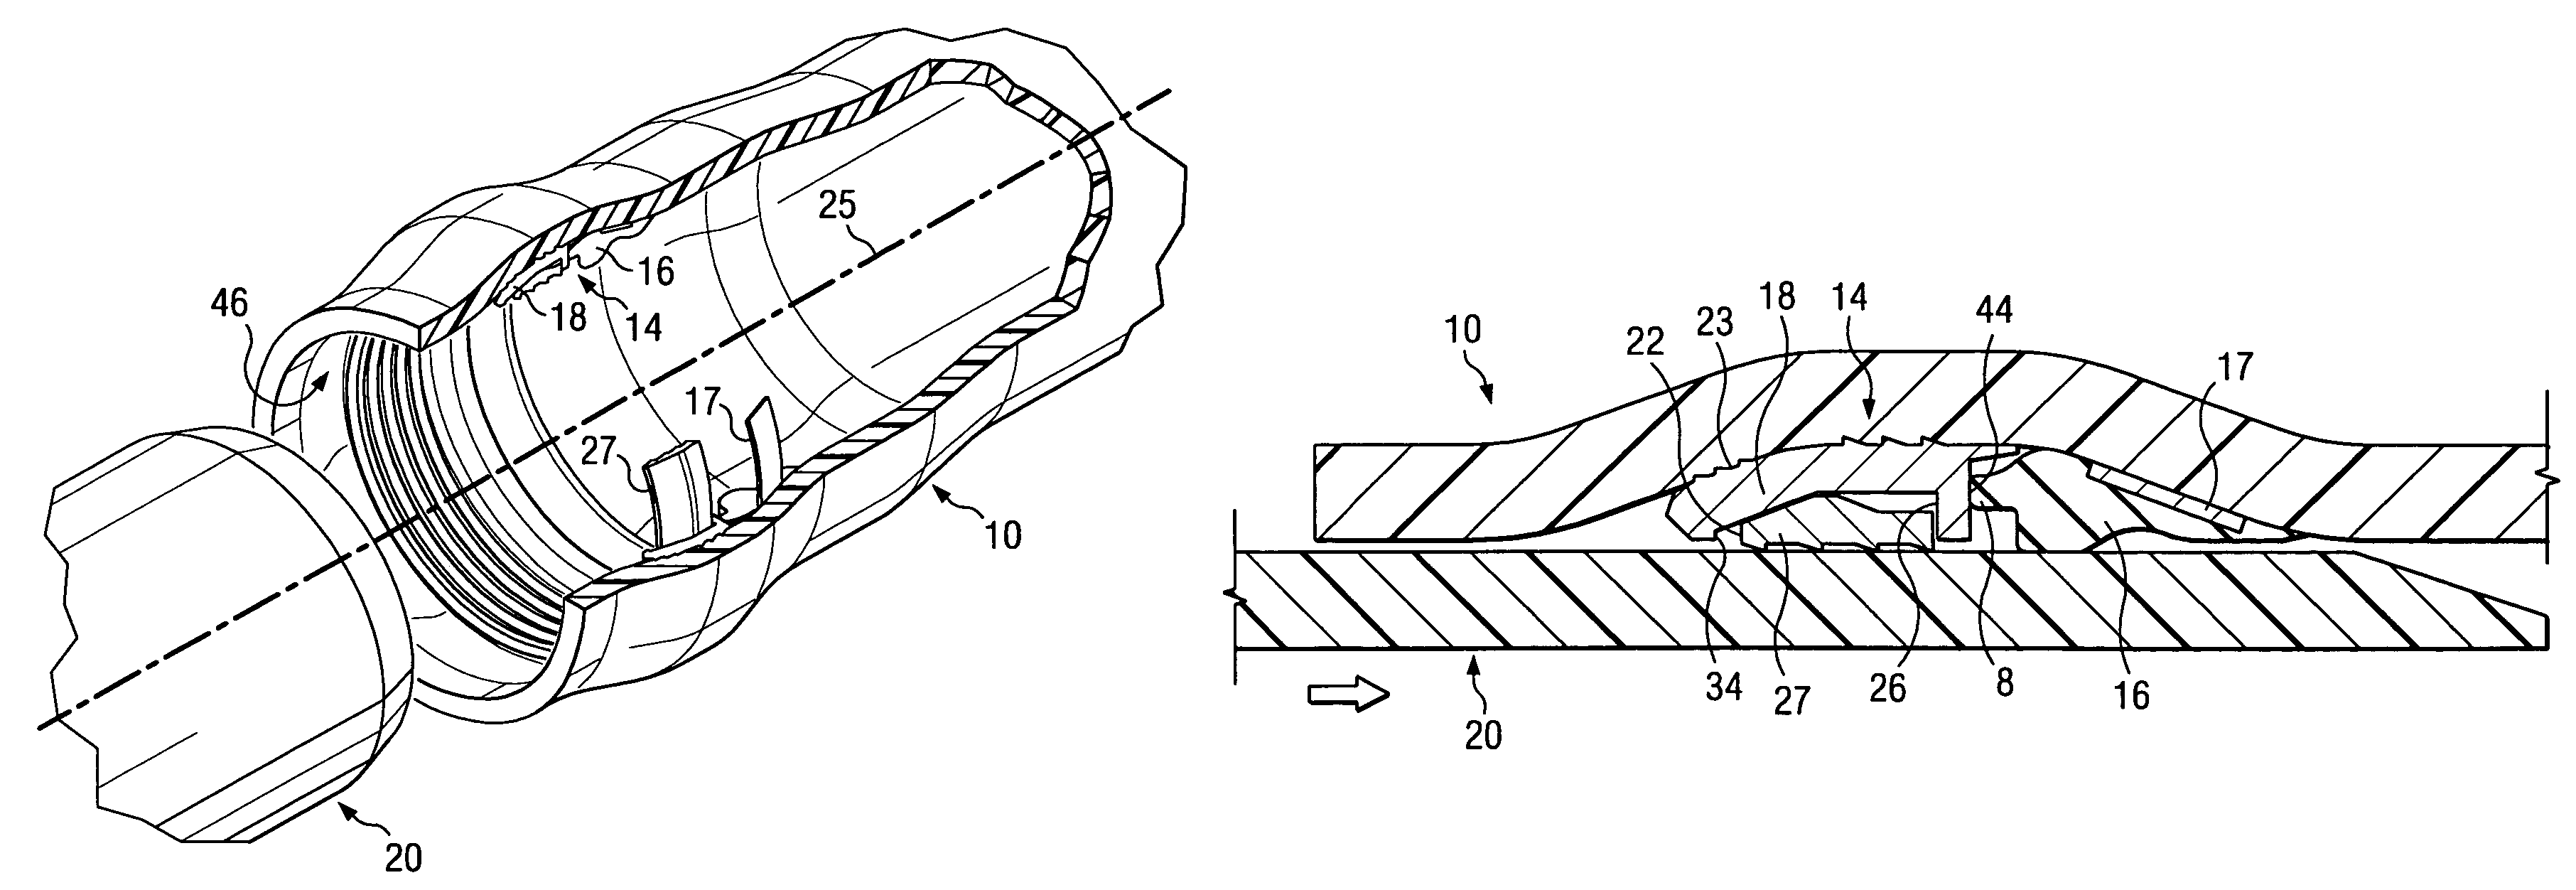 Method of manufacturing a seal and restraining system